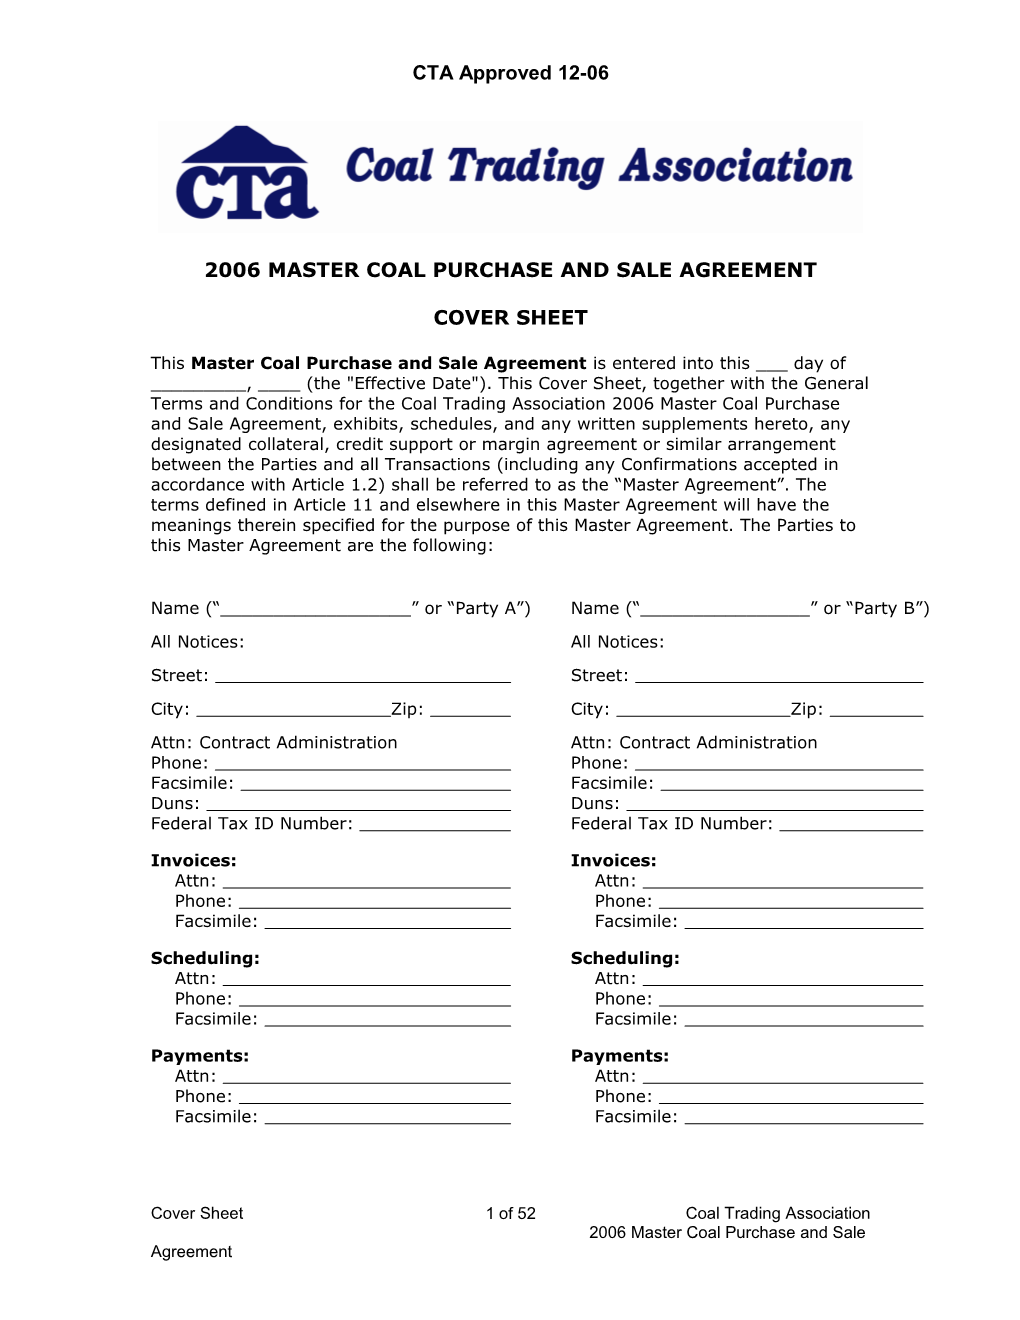 Master Coal Purchase And Sale Agreement